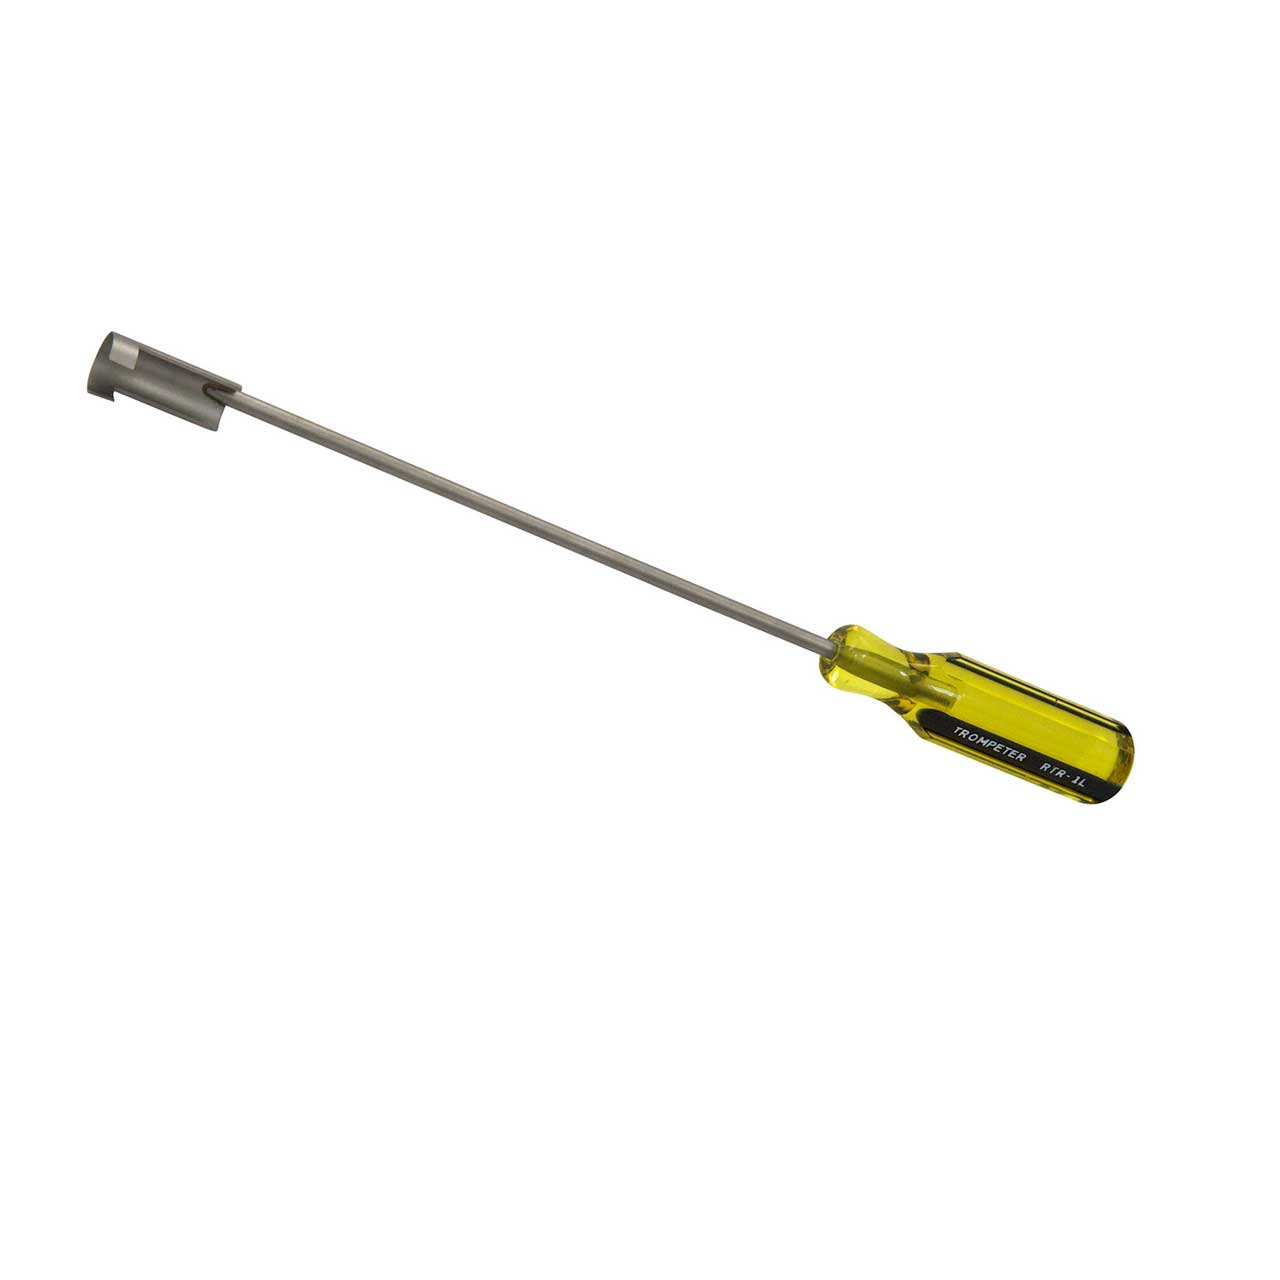 Standard BNC or Mini Weco Removal Tool 12 inch